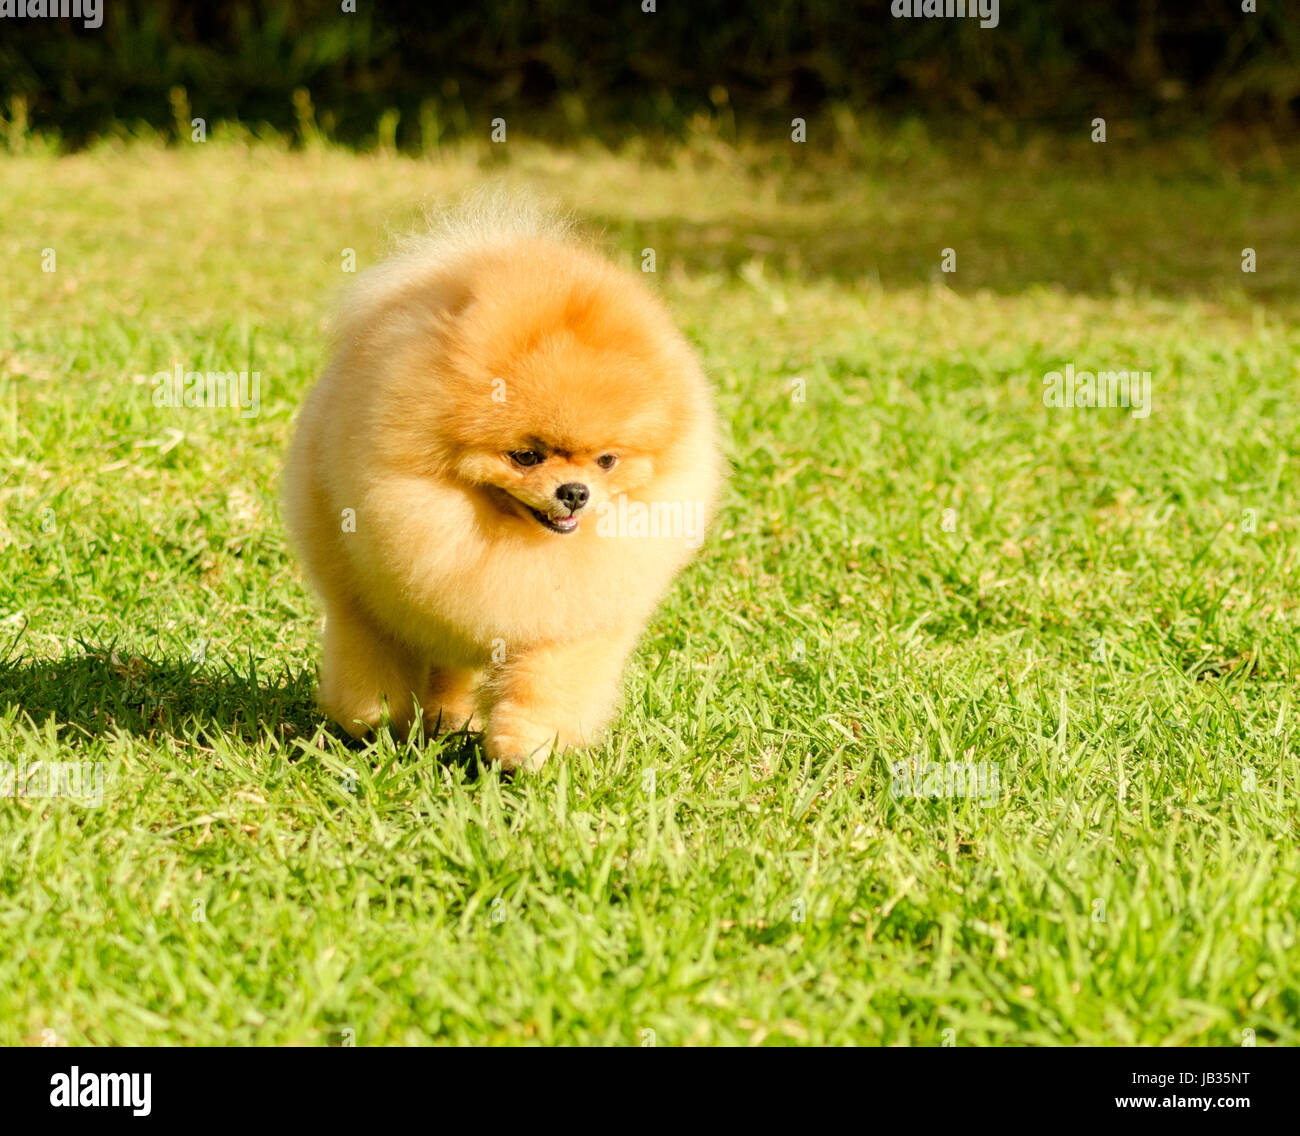 A small young beautiful fluffy orange pomeranian puppy dog walking on grass. Pom dogs are considered to be in the toy category and make very good companion dogs Stock Photo -